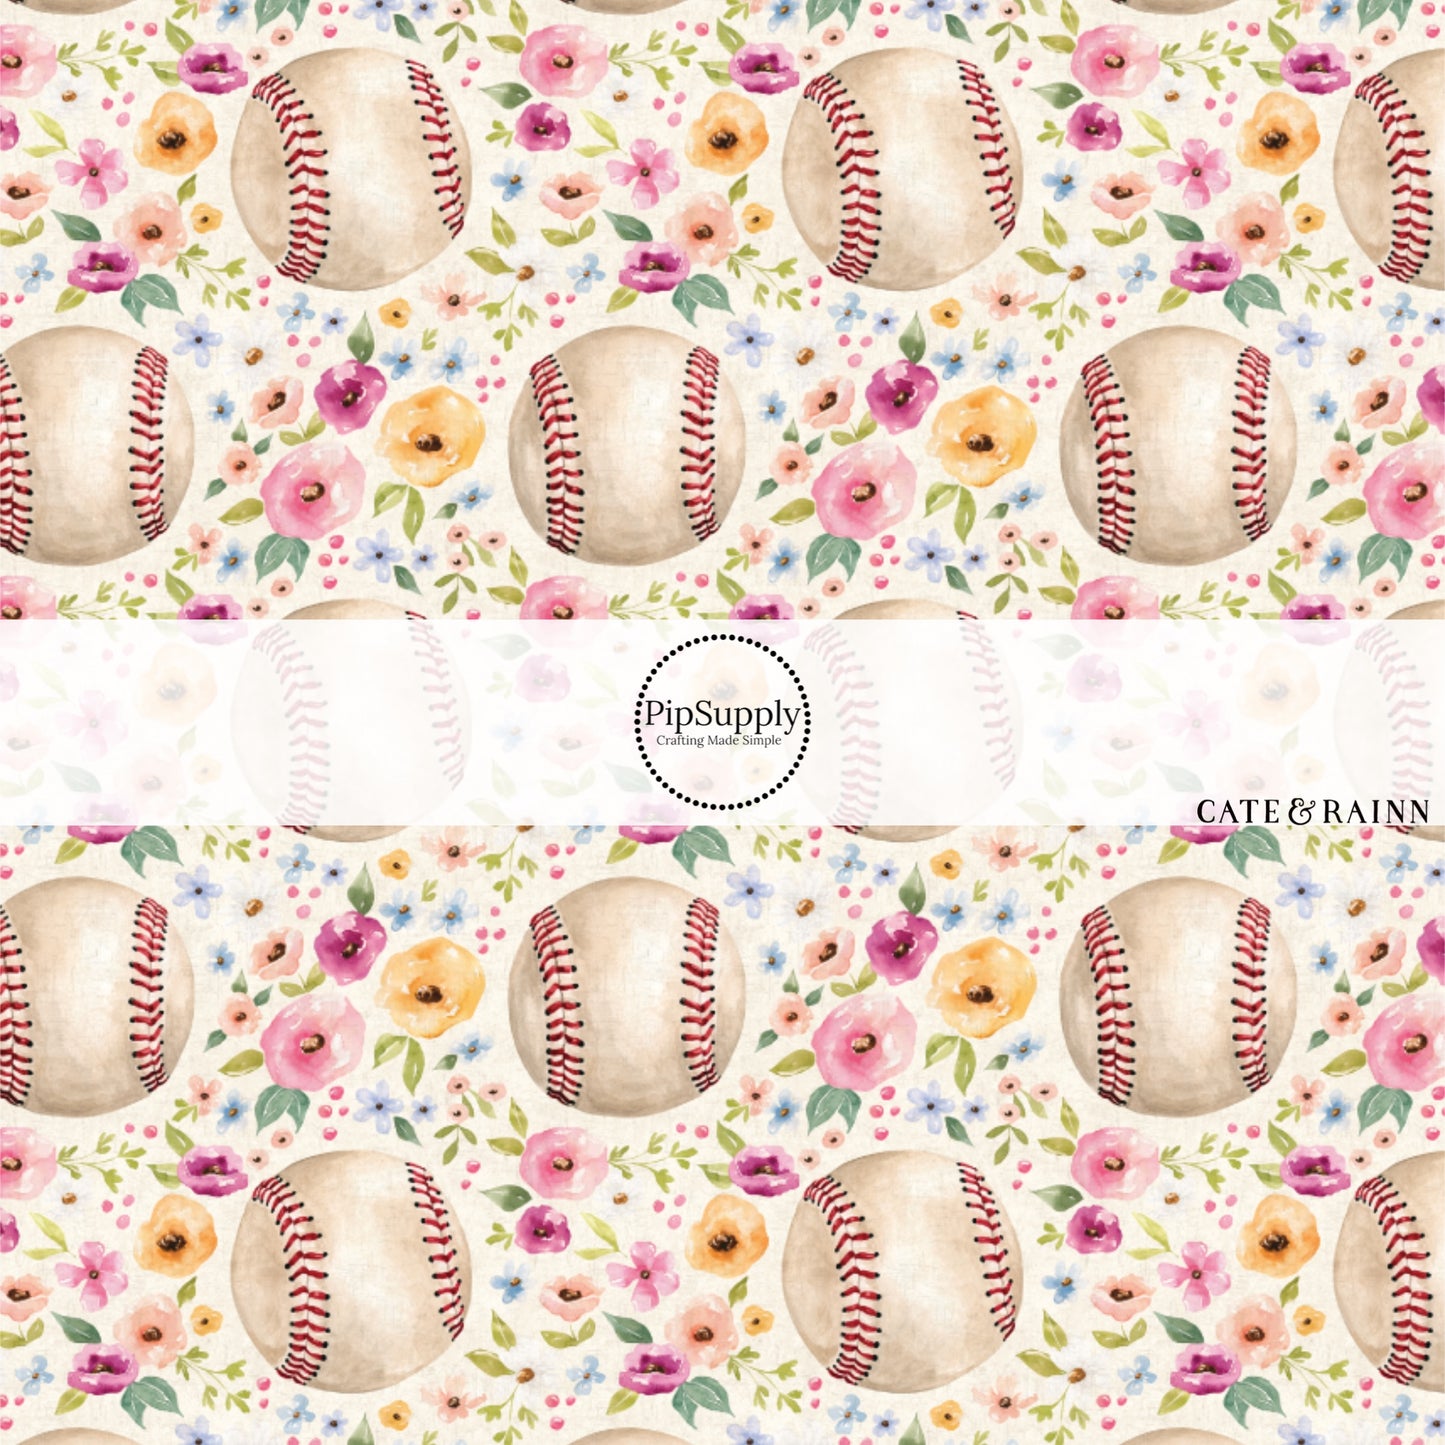 Pastel Florals and Baseballs on Cream Fabric by the Yard.